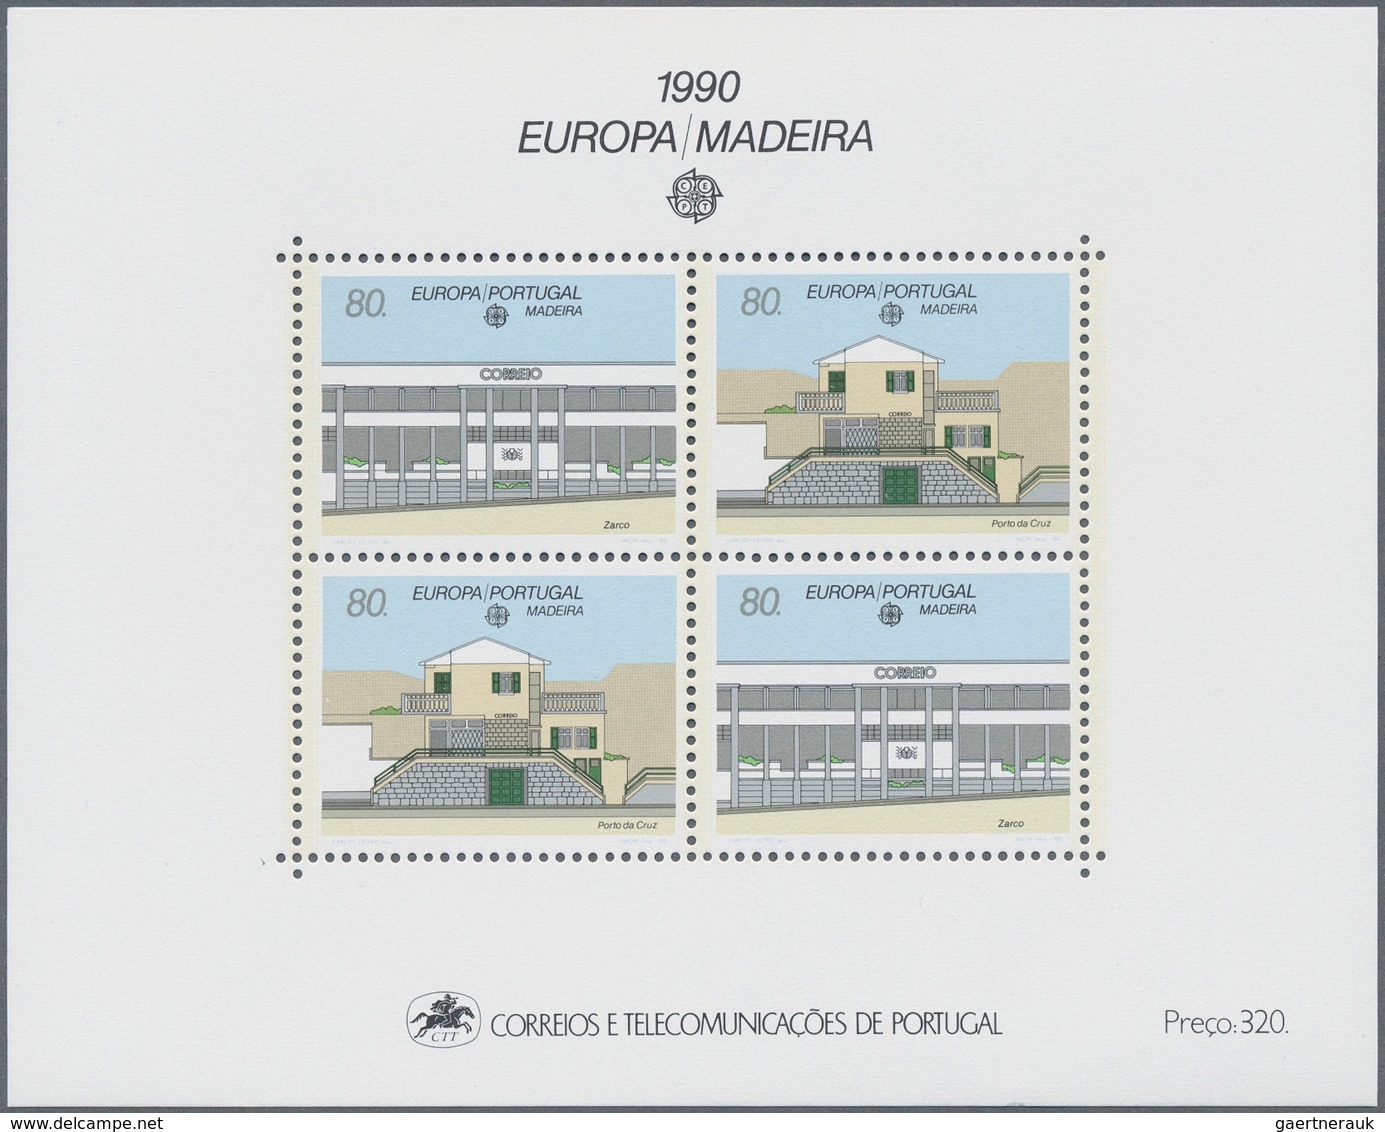 28837 Europa-Union (CEPT): Inventory of ONE HUNDRED in the main numbers complete collections of the joint